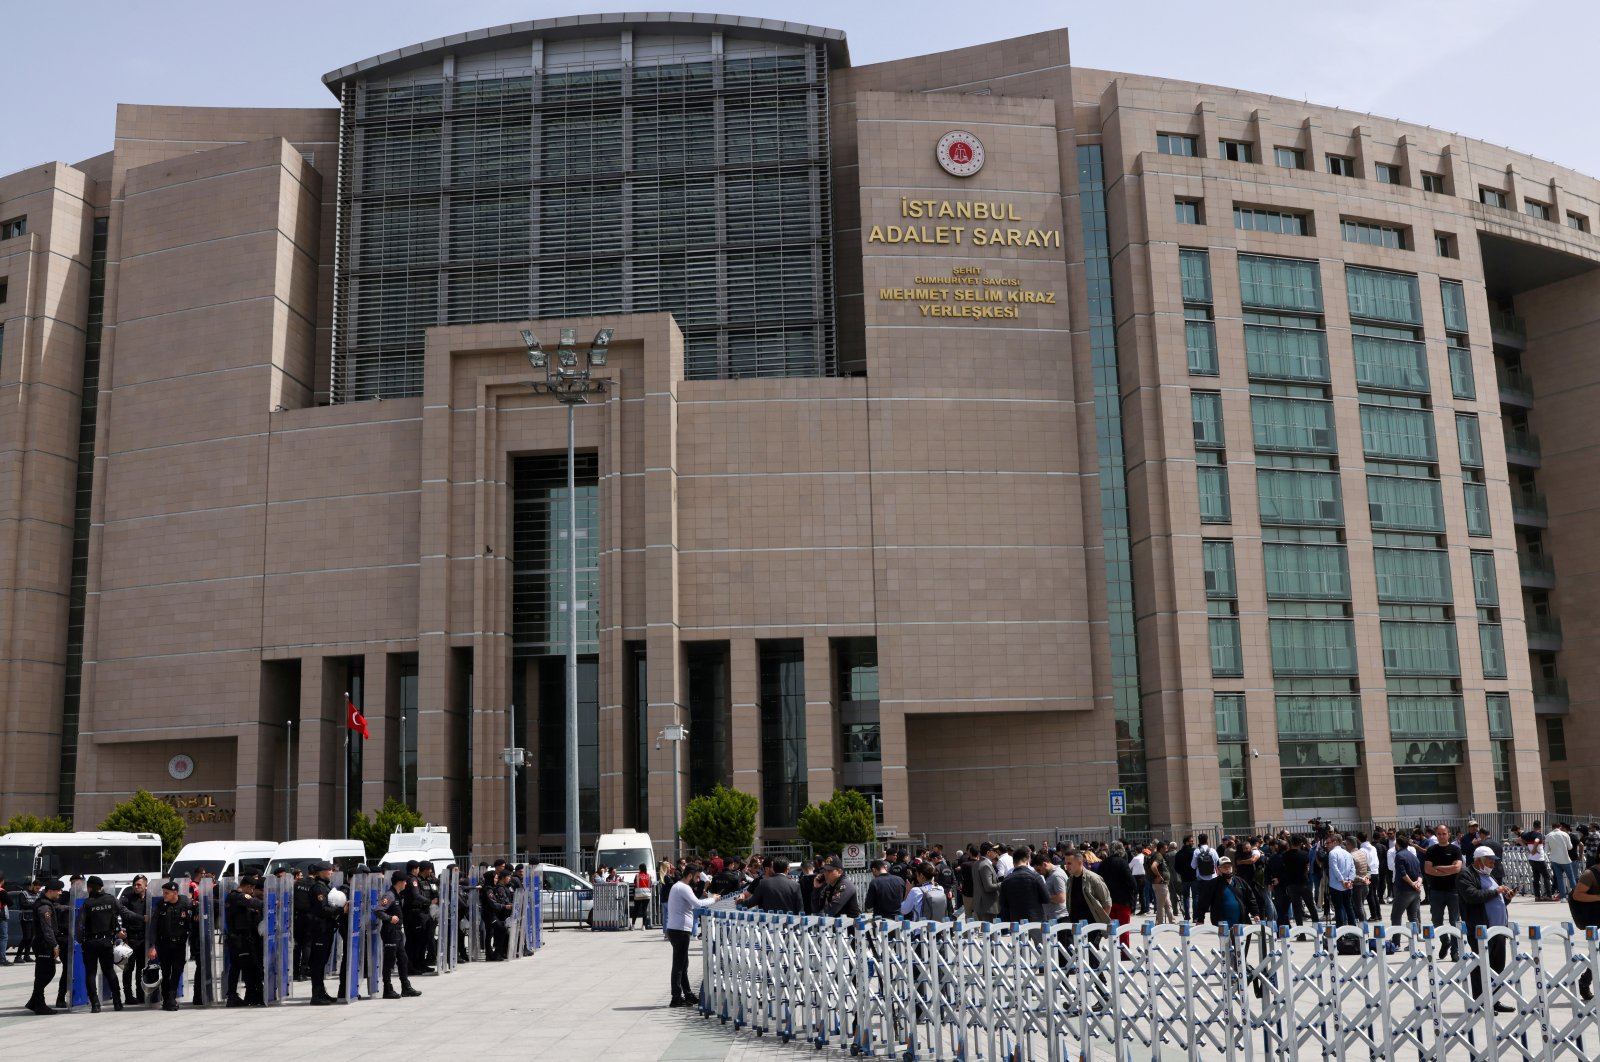 Riot police secure the entrance to Çağlayan Courthouse during a protest against a Turkish court decision that sentenced Osman Kavala to life in prison over trying to overthrow the government, in Istanbul, Turkey, April 26, 2022. (REUTERS)